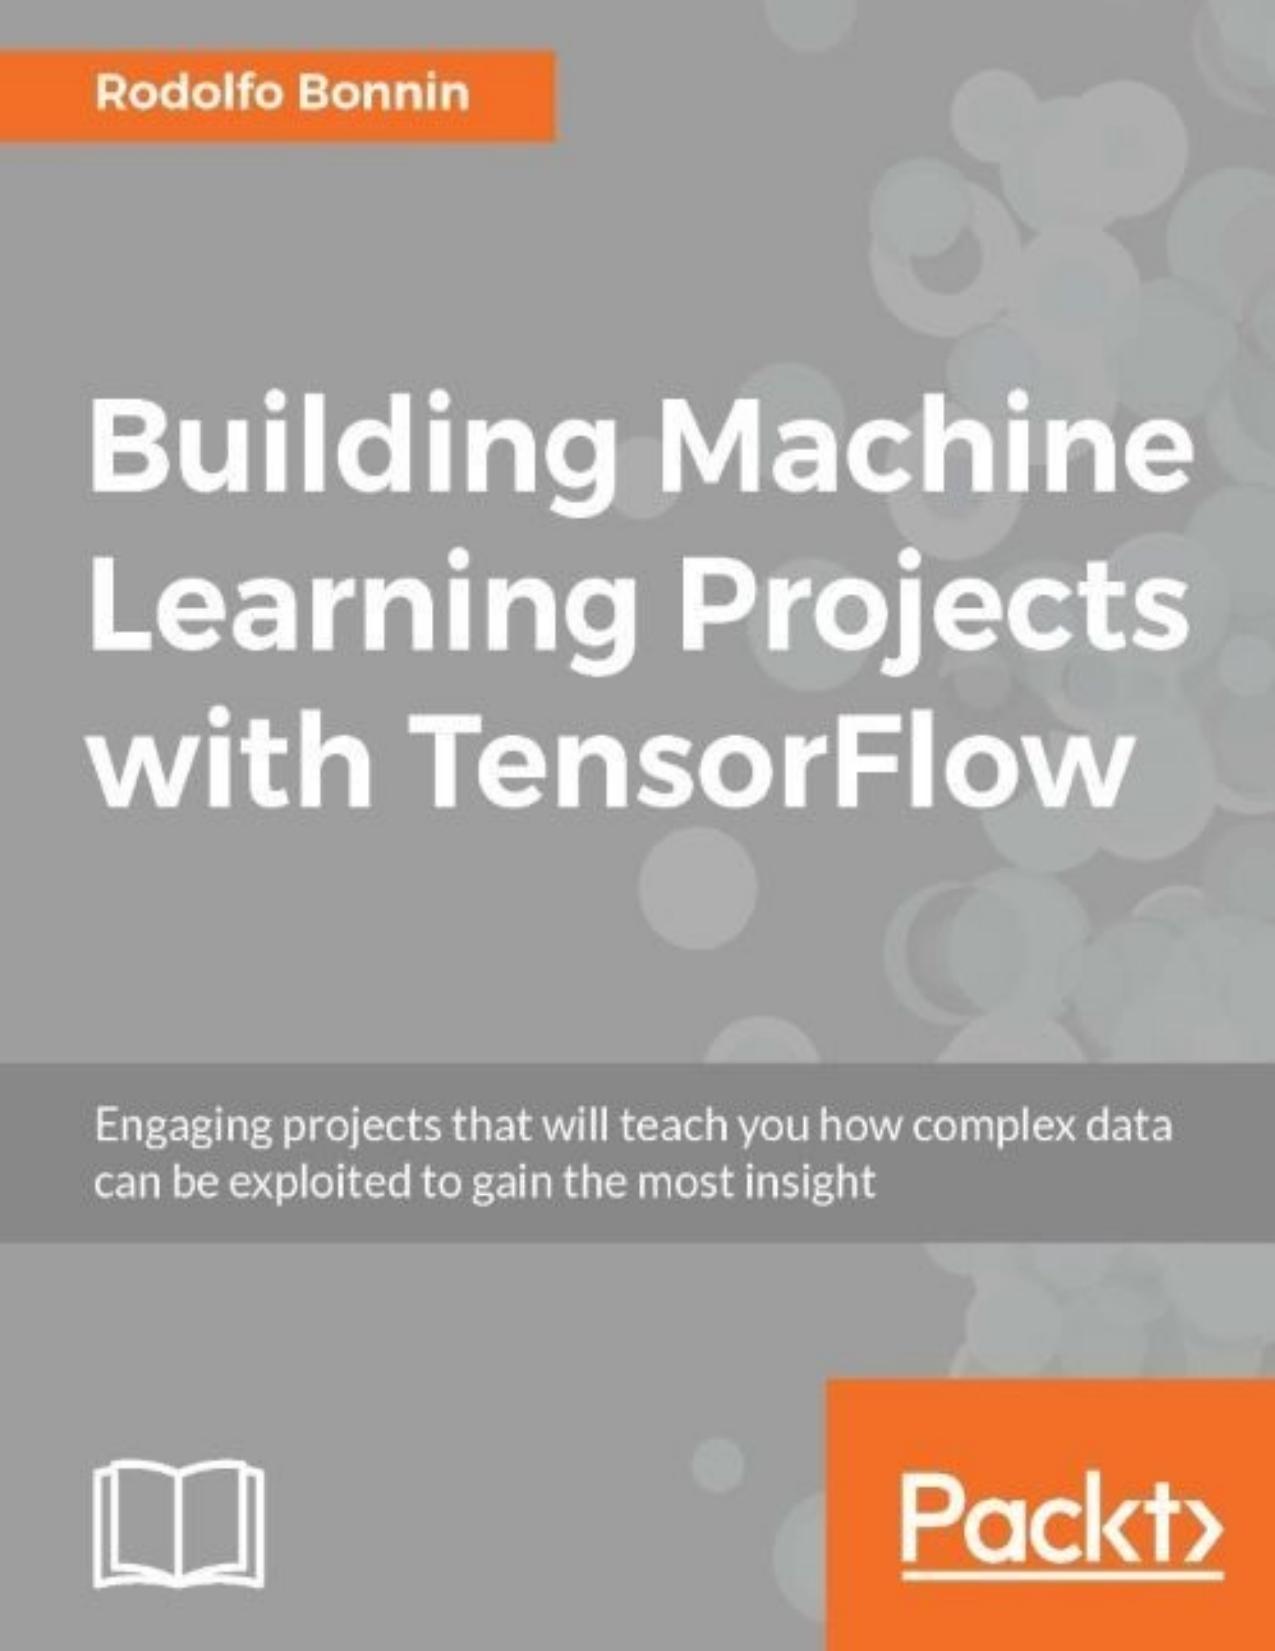 Building Machine Learning Projects with TensorFlow by Rodolfo Bonnin